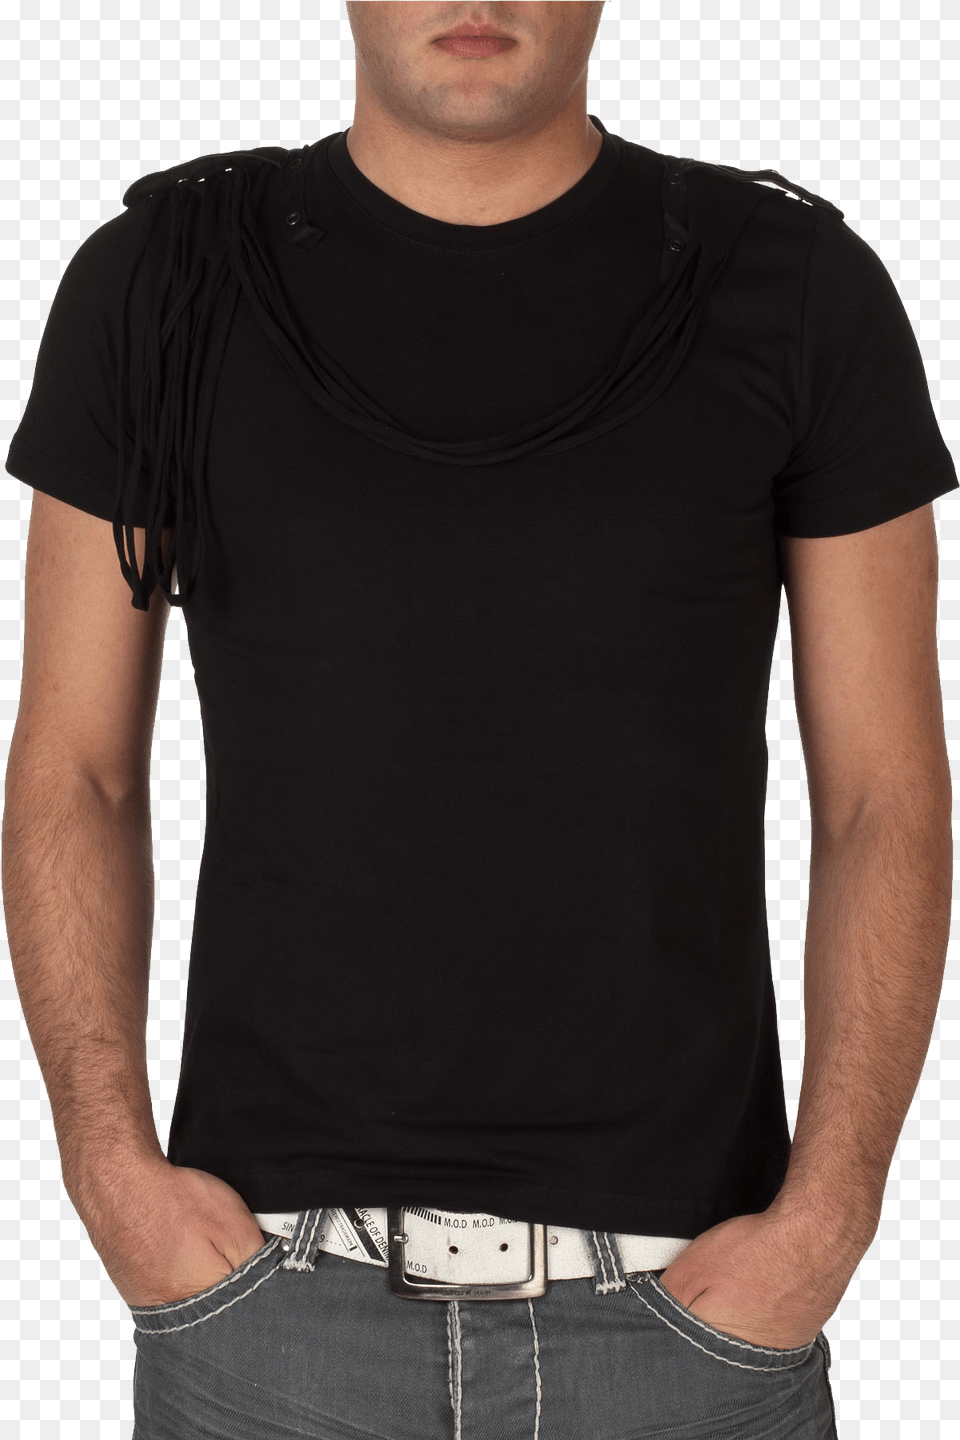 Black Polo Shirt T Shirt, Clothing, T-shirt, Adult, Male Free Png Download